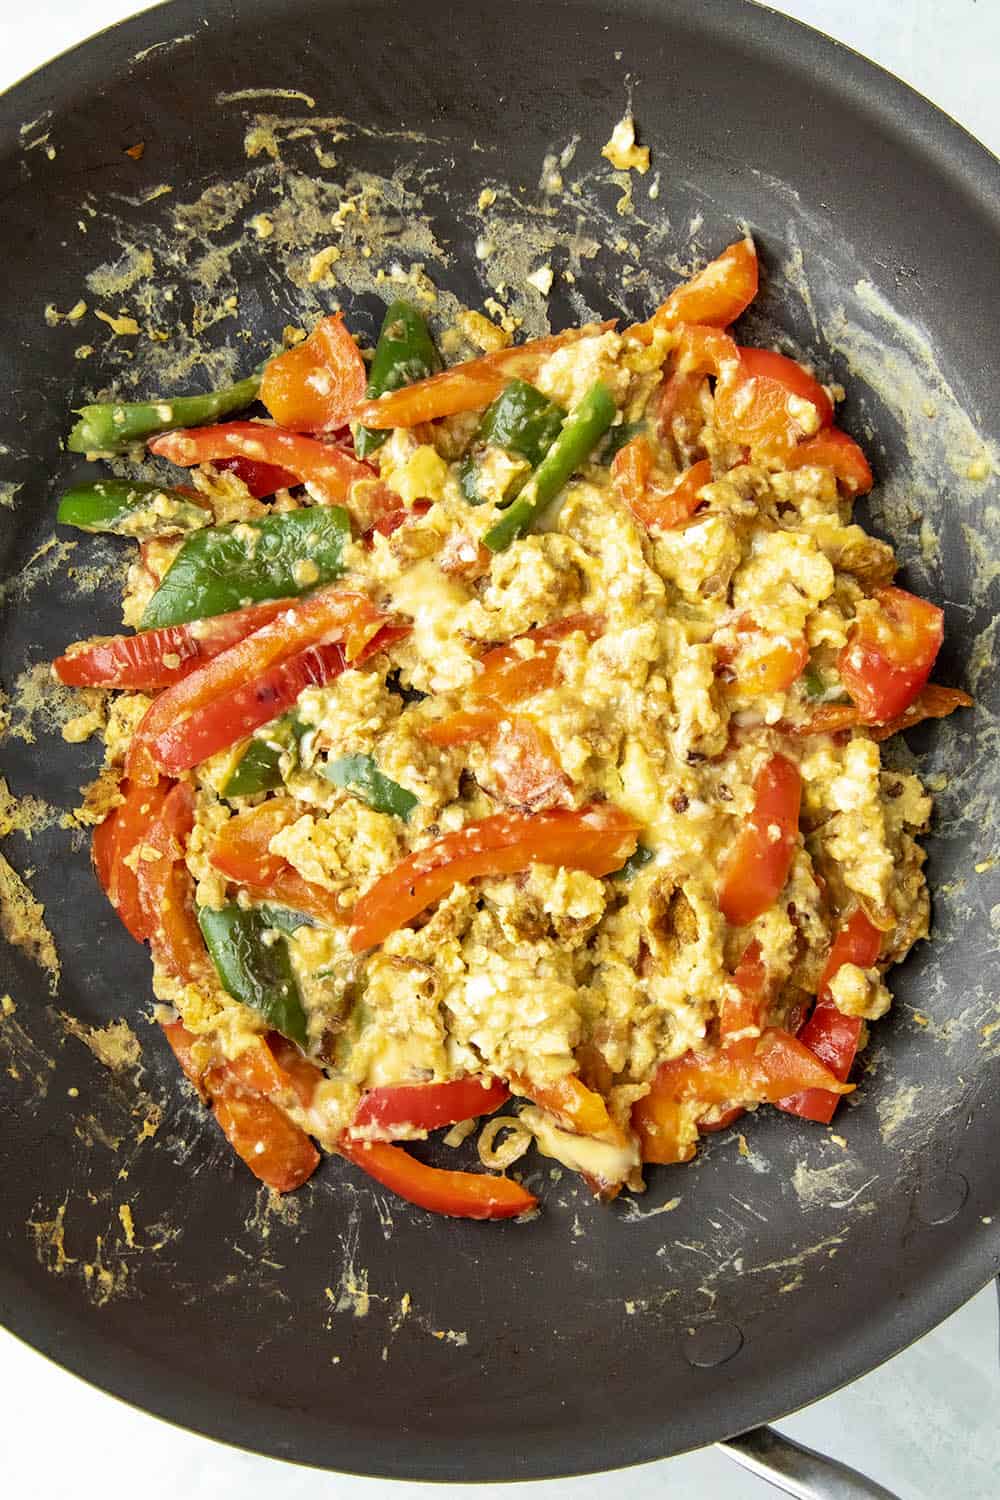 Scrambled eggs with peppers in a pan